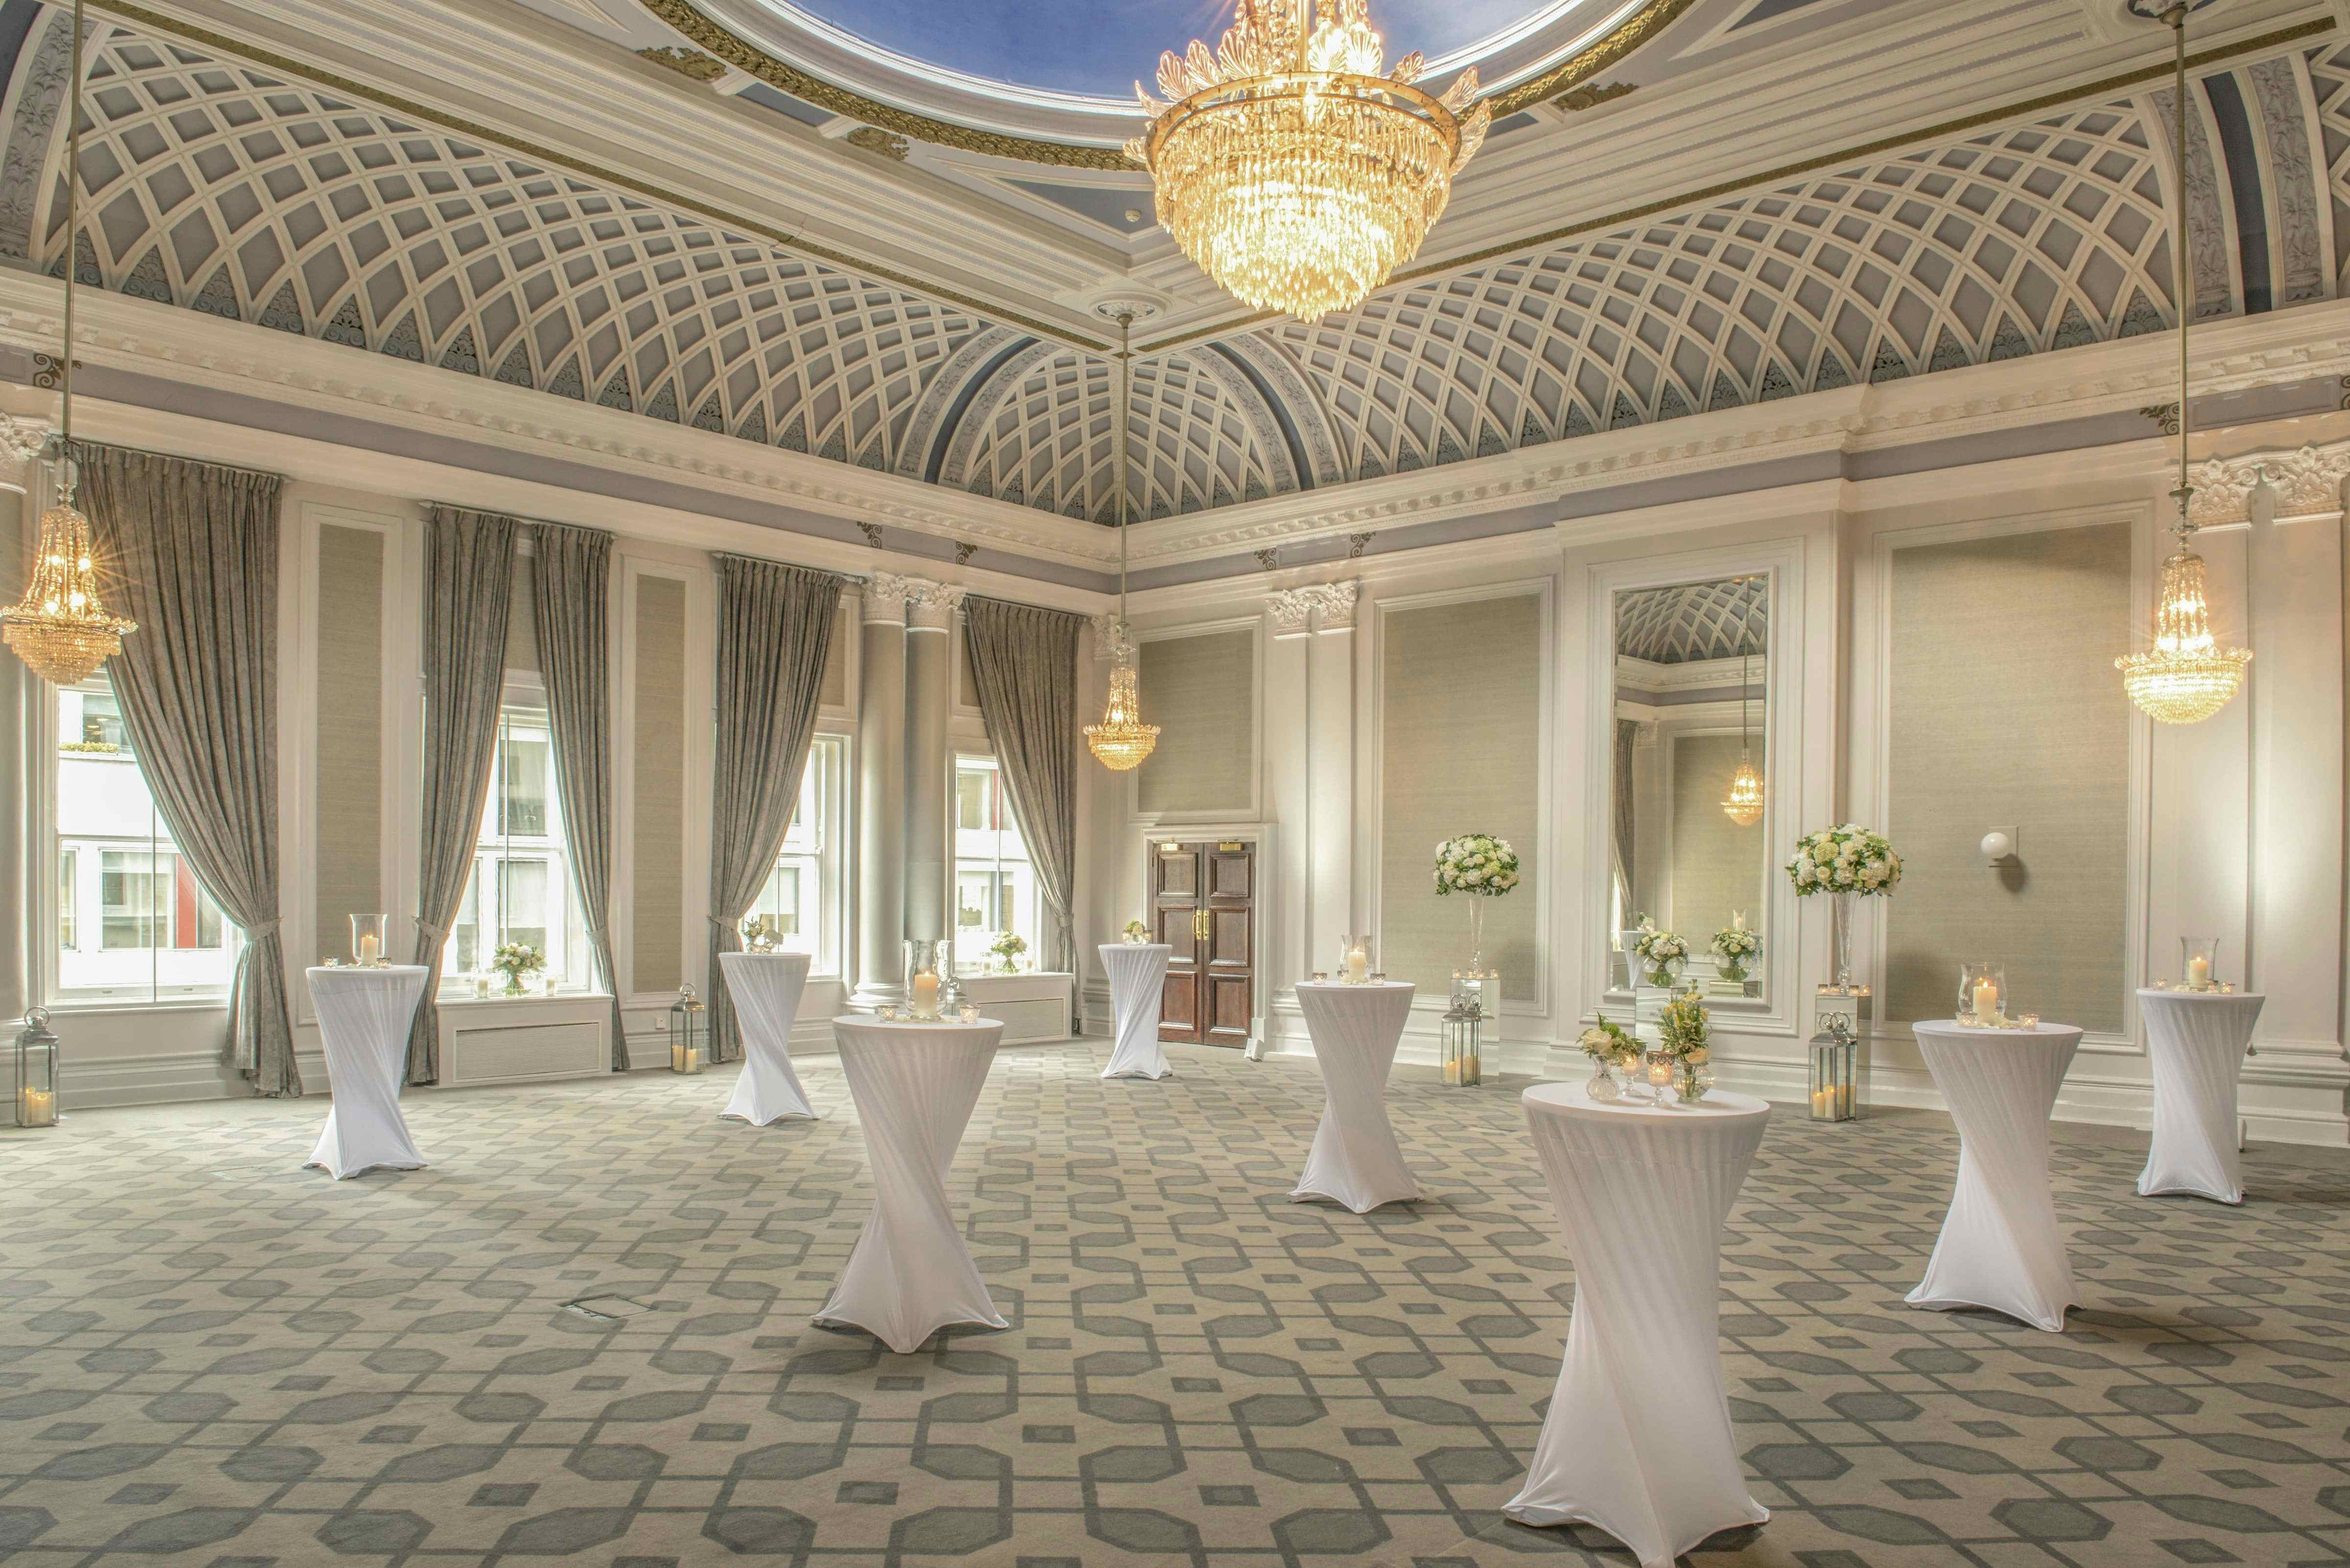 De Vere Grand Connaught Rooms - A stunning London banqueting hall for